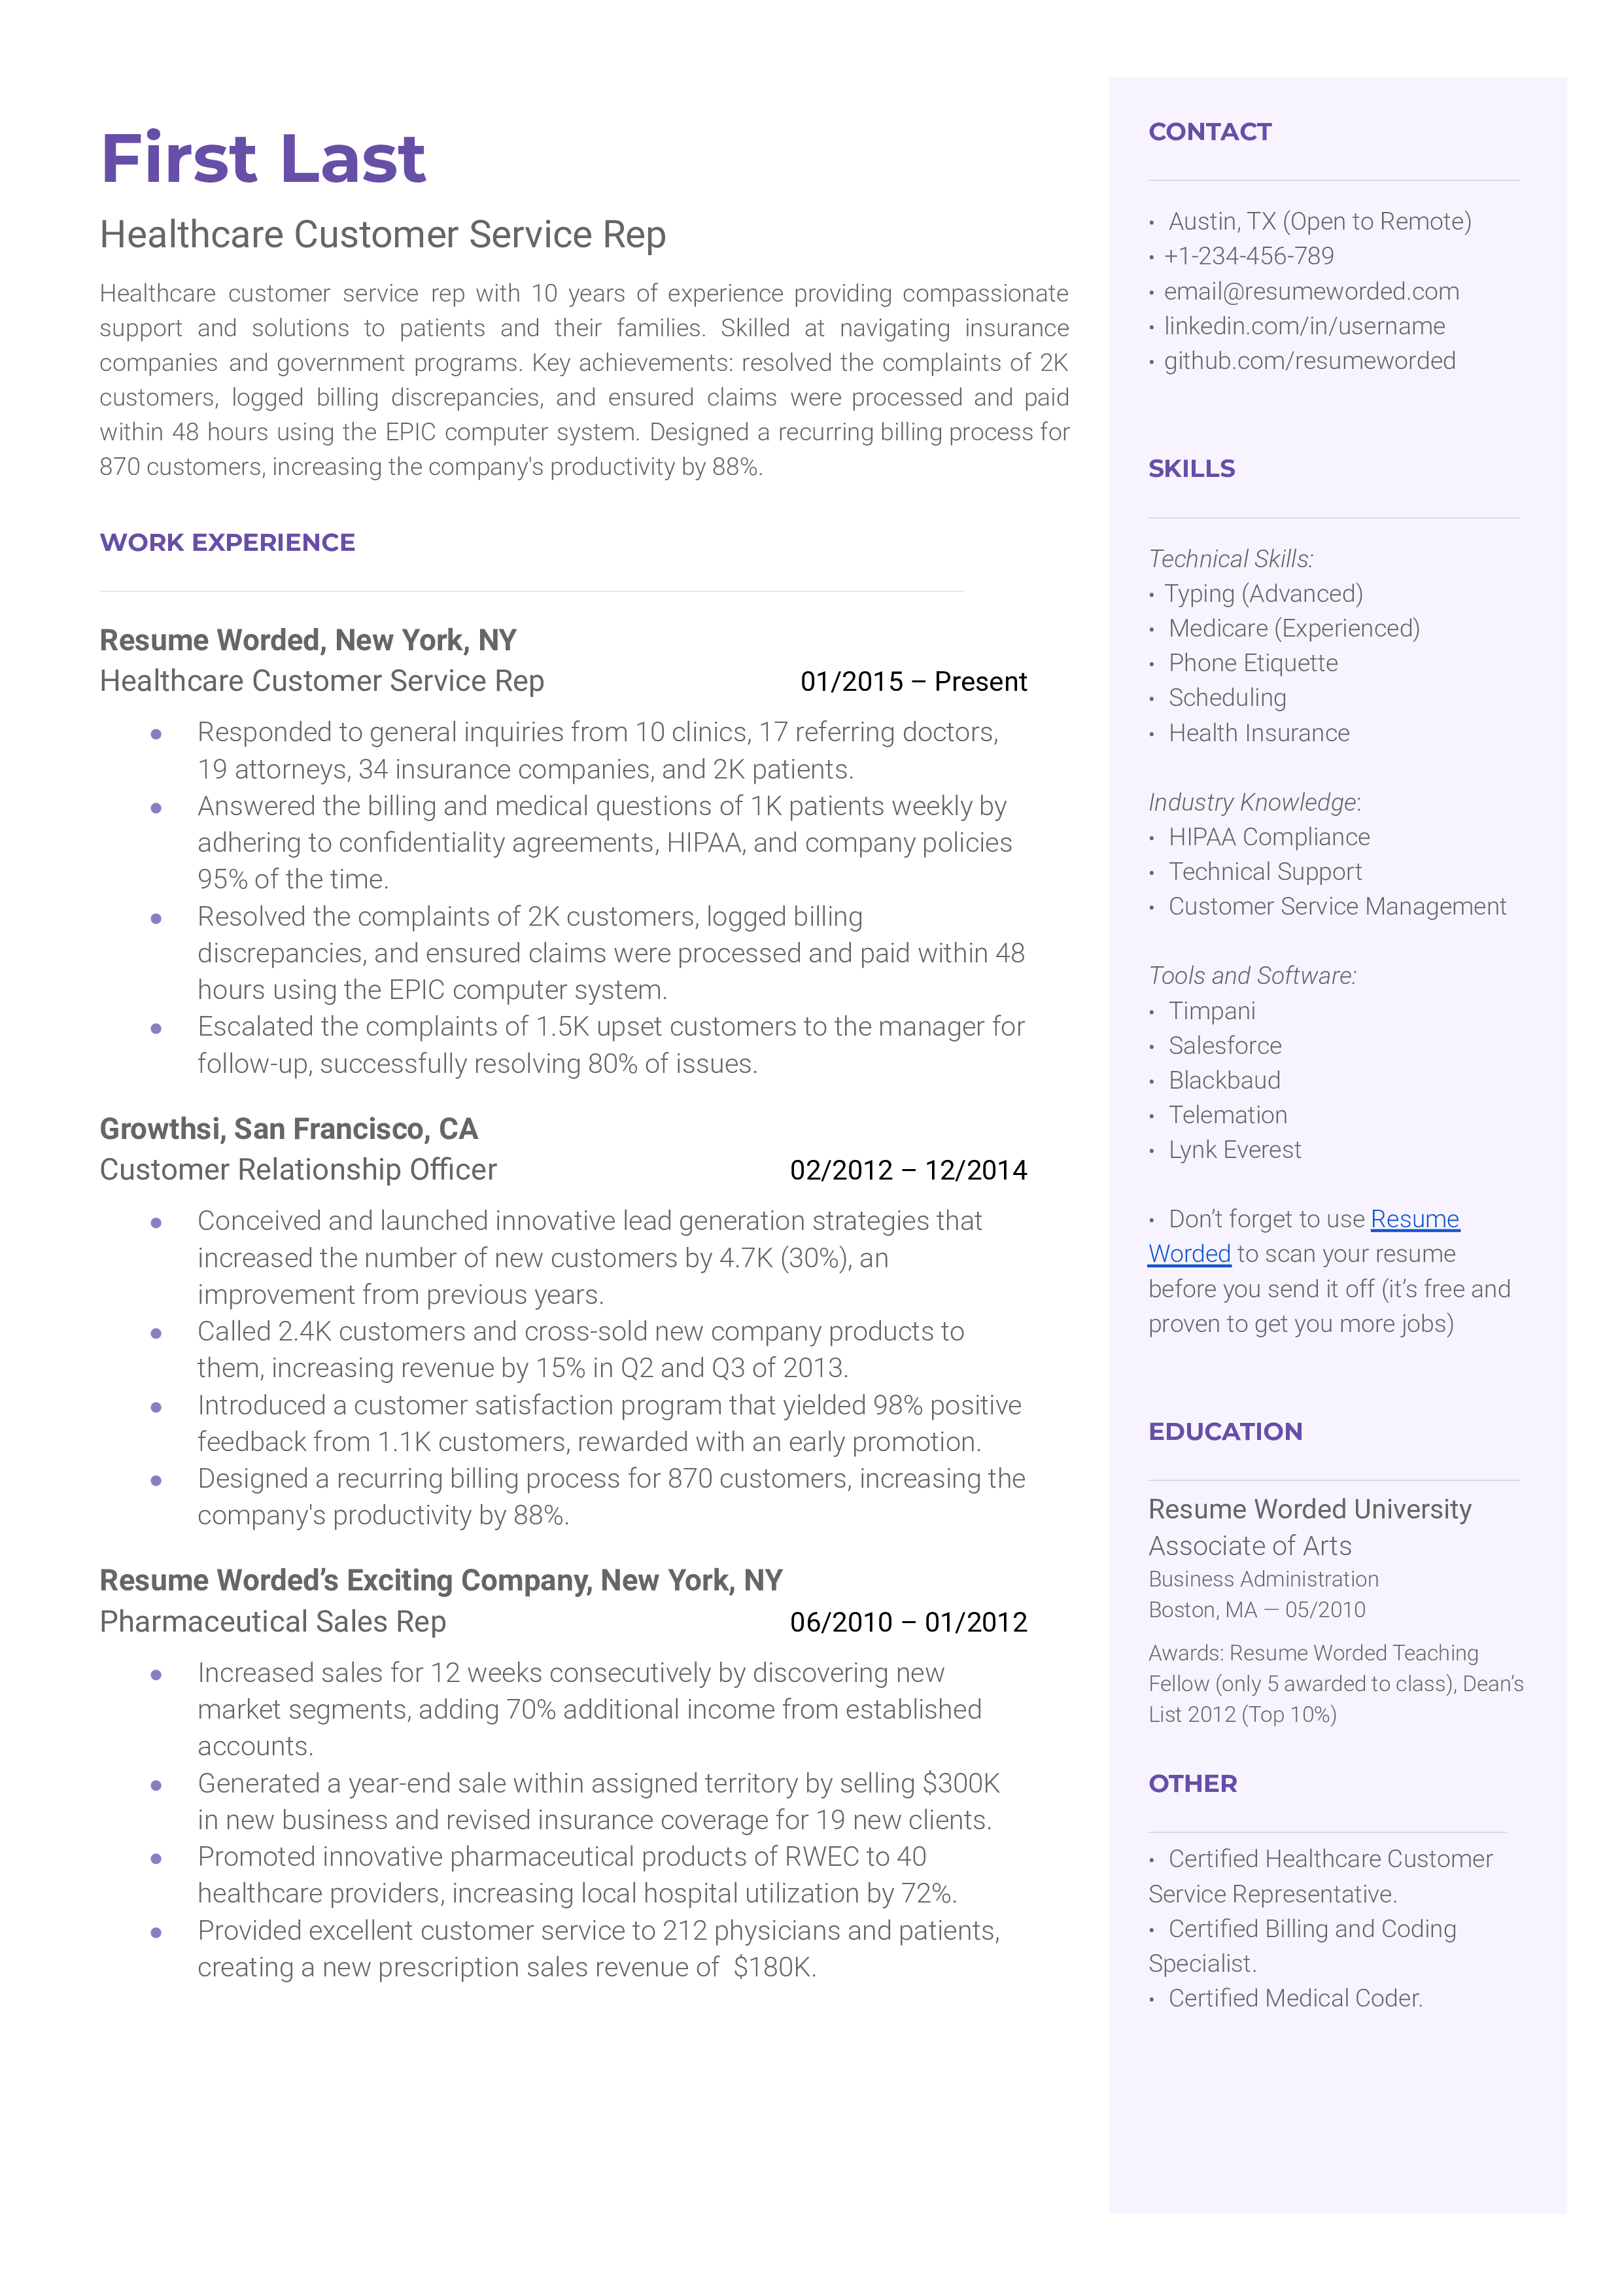 A healthcare customer service representative resume sample that highlights the applicant’s healthcare background and experience.